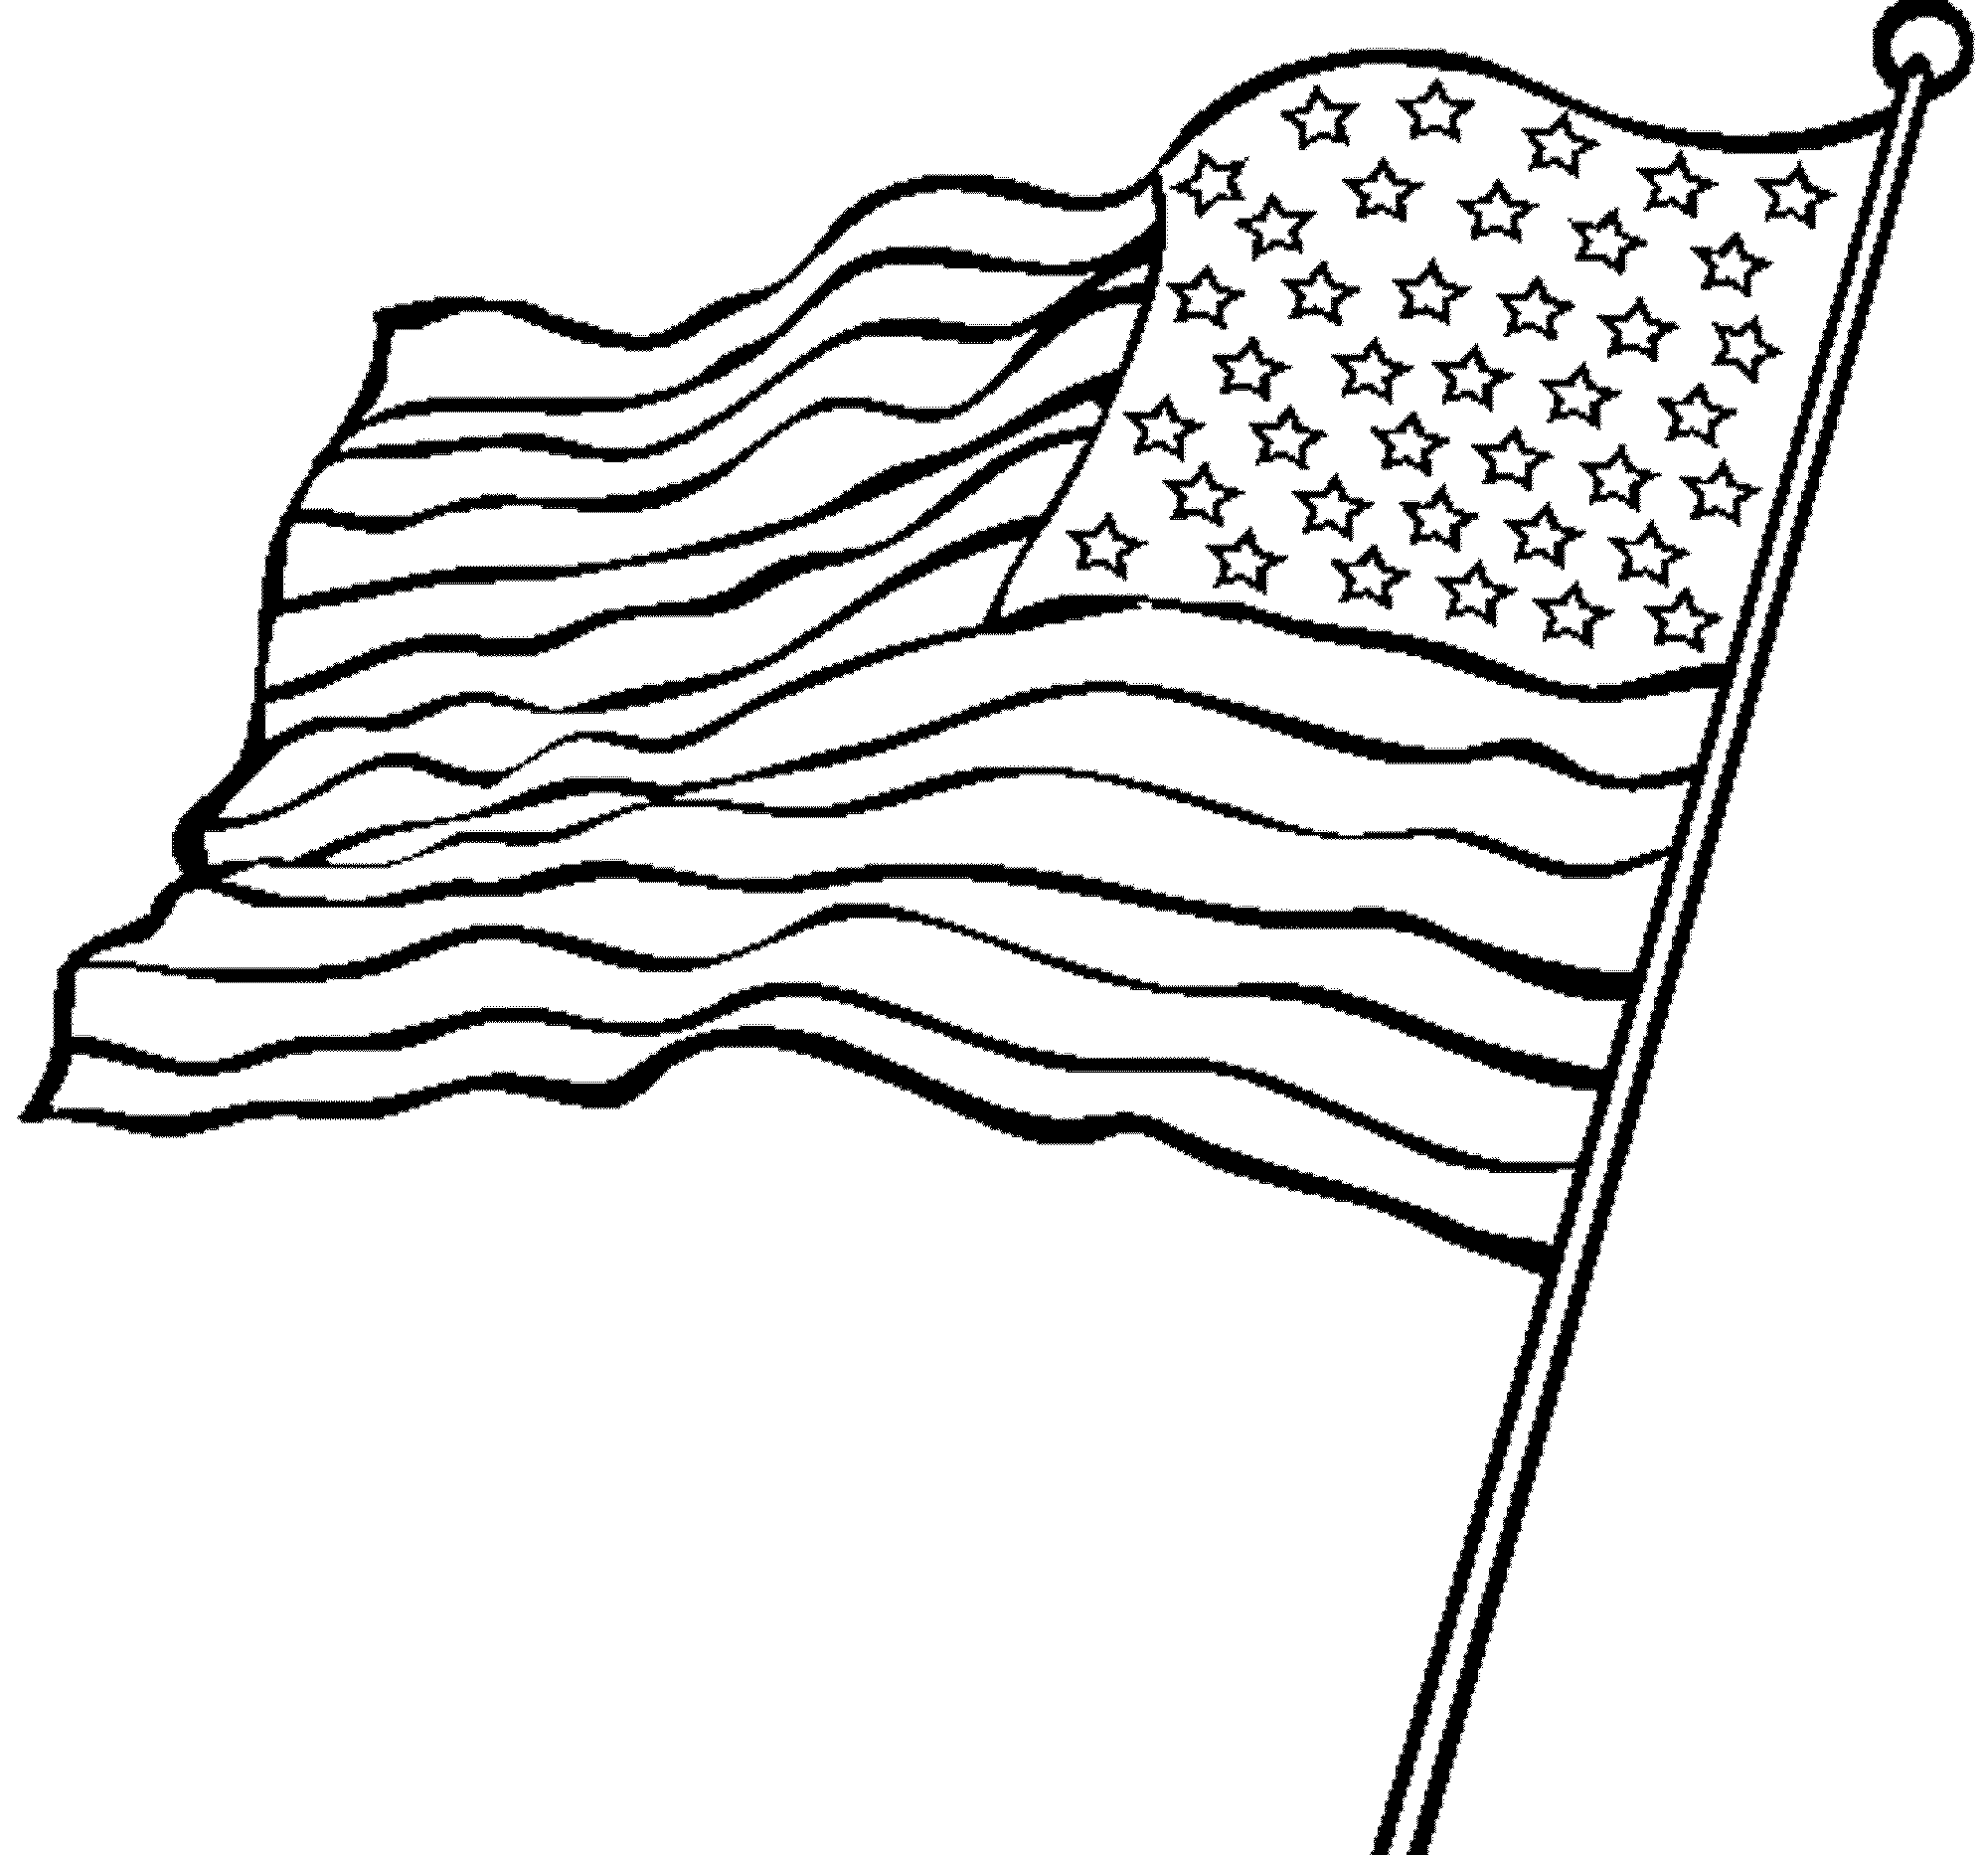 Original American Flag Coloring Page Coloring Home